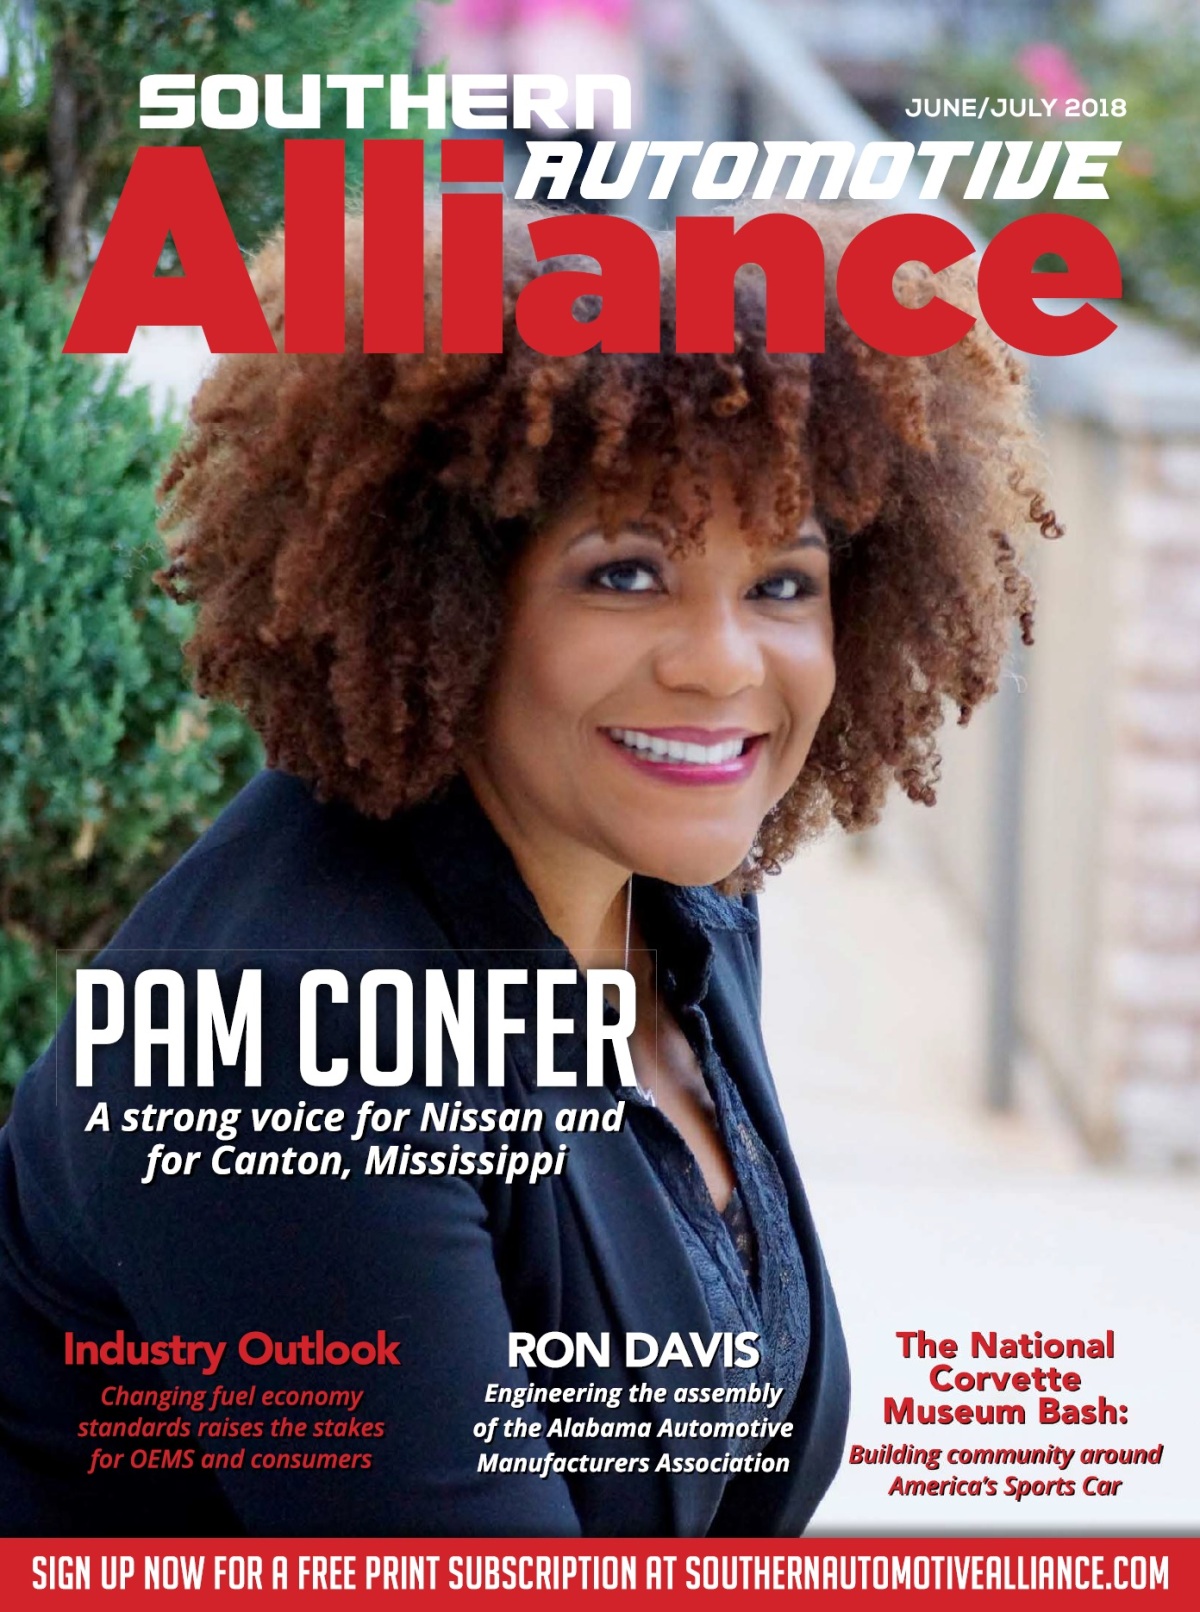 The latest issue of Southern Automotive Alliance